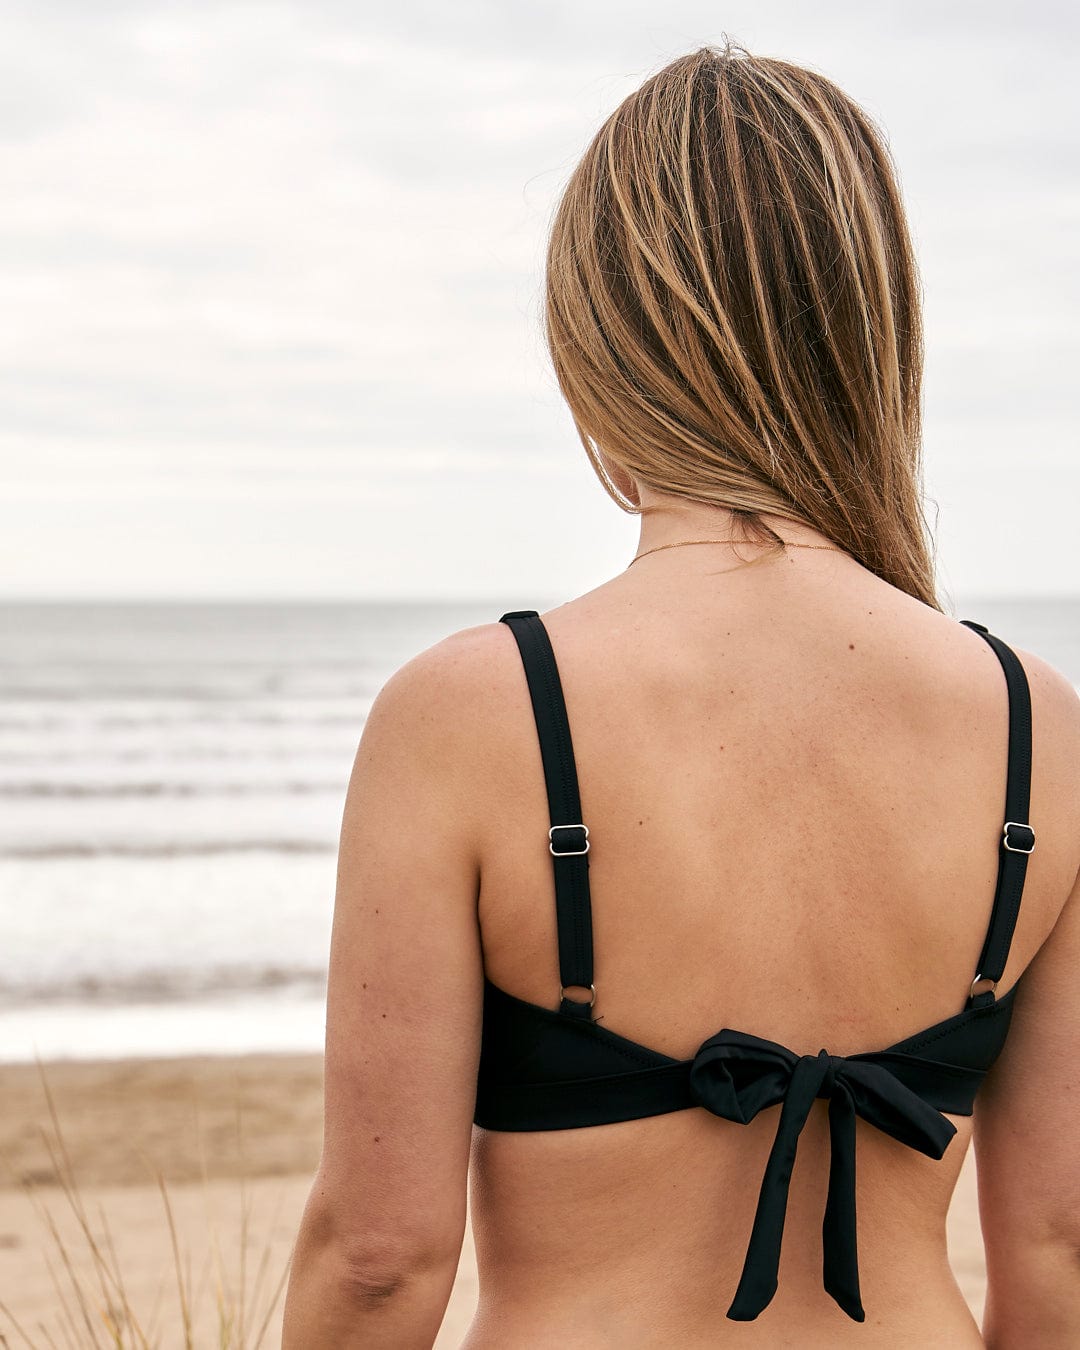 The woman is pictured from the back, wearing a Saltrock Rosie - Womens Bikini Top - Black featuring adjustable straps.